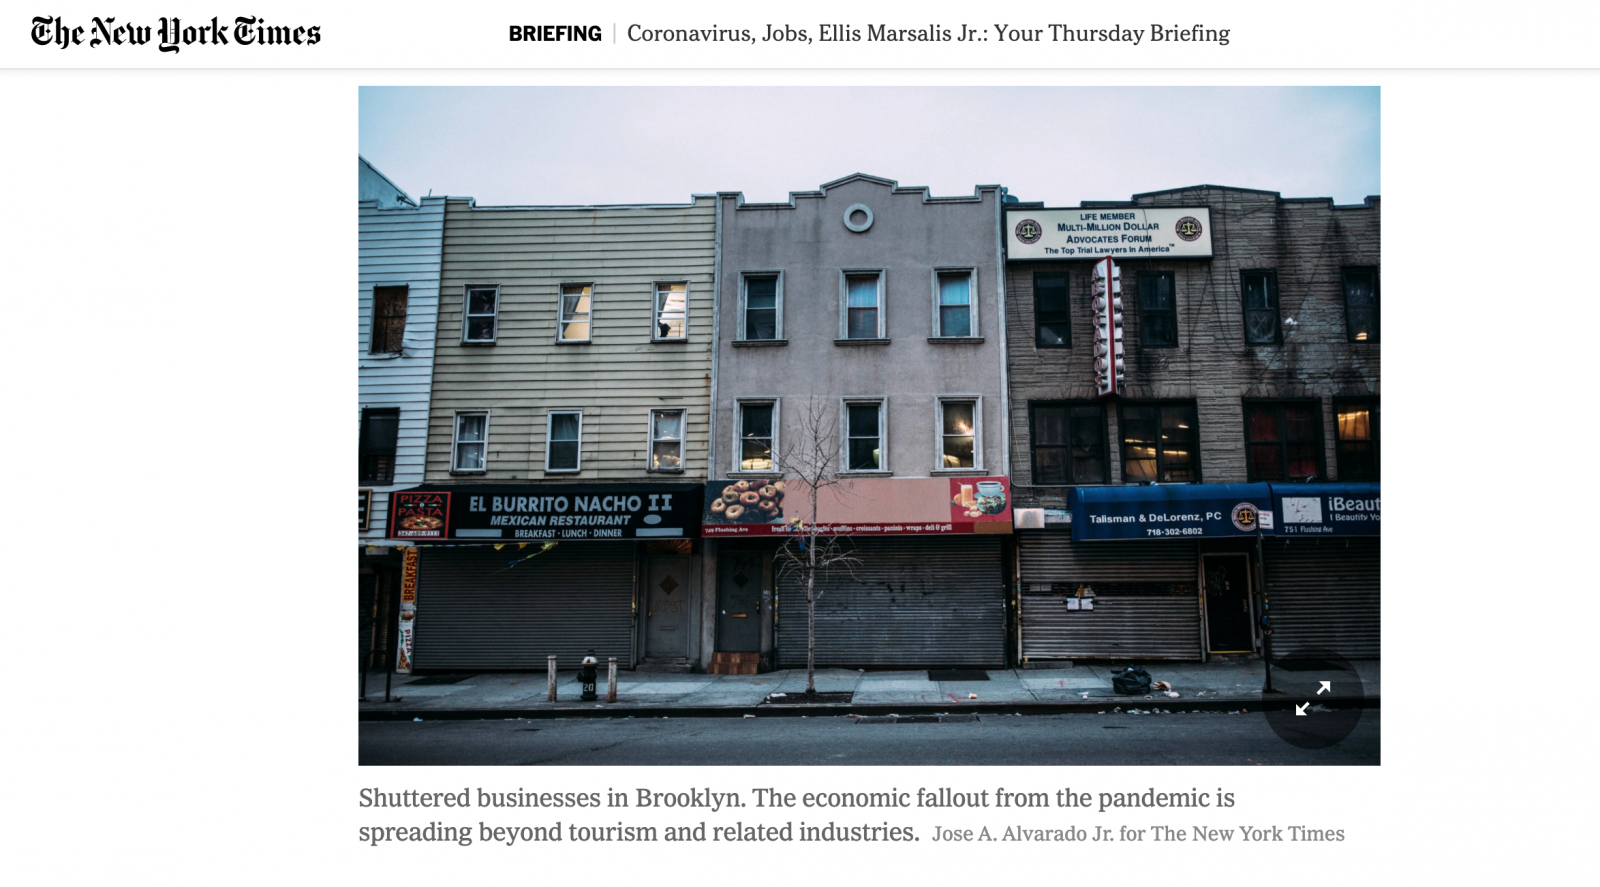 for The New York Times: Thursday Briefing: Shuttered businesses in Brooklyn. The economic fallout from the pandemic is spreading beyond tourism and related industries.